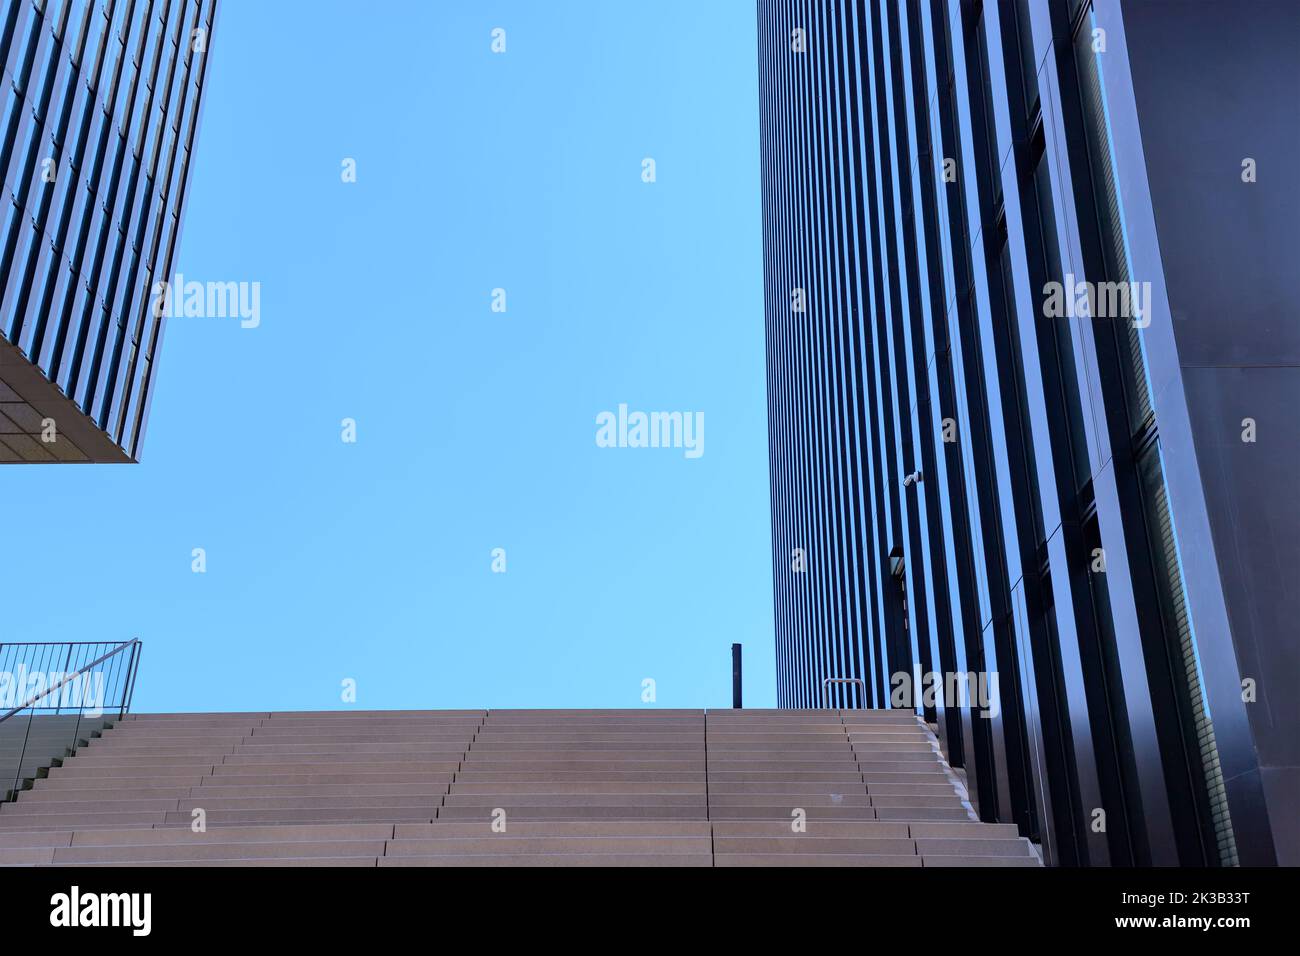 Abstract low angle view of business skyscraper building and stairs Stock Photo